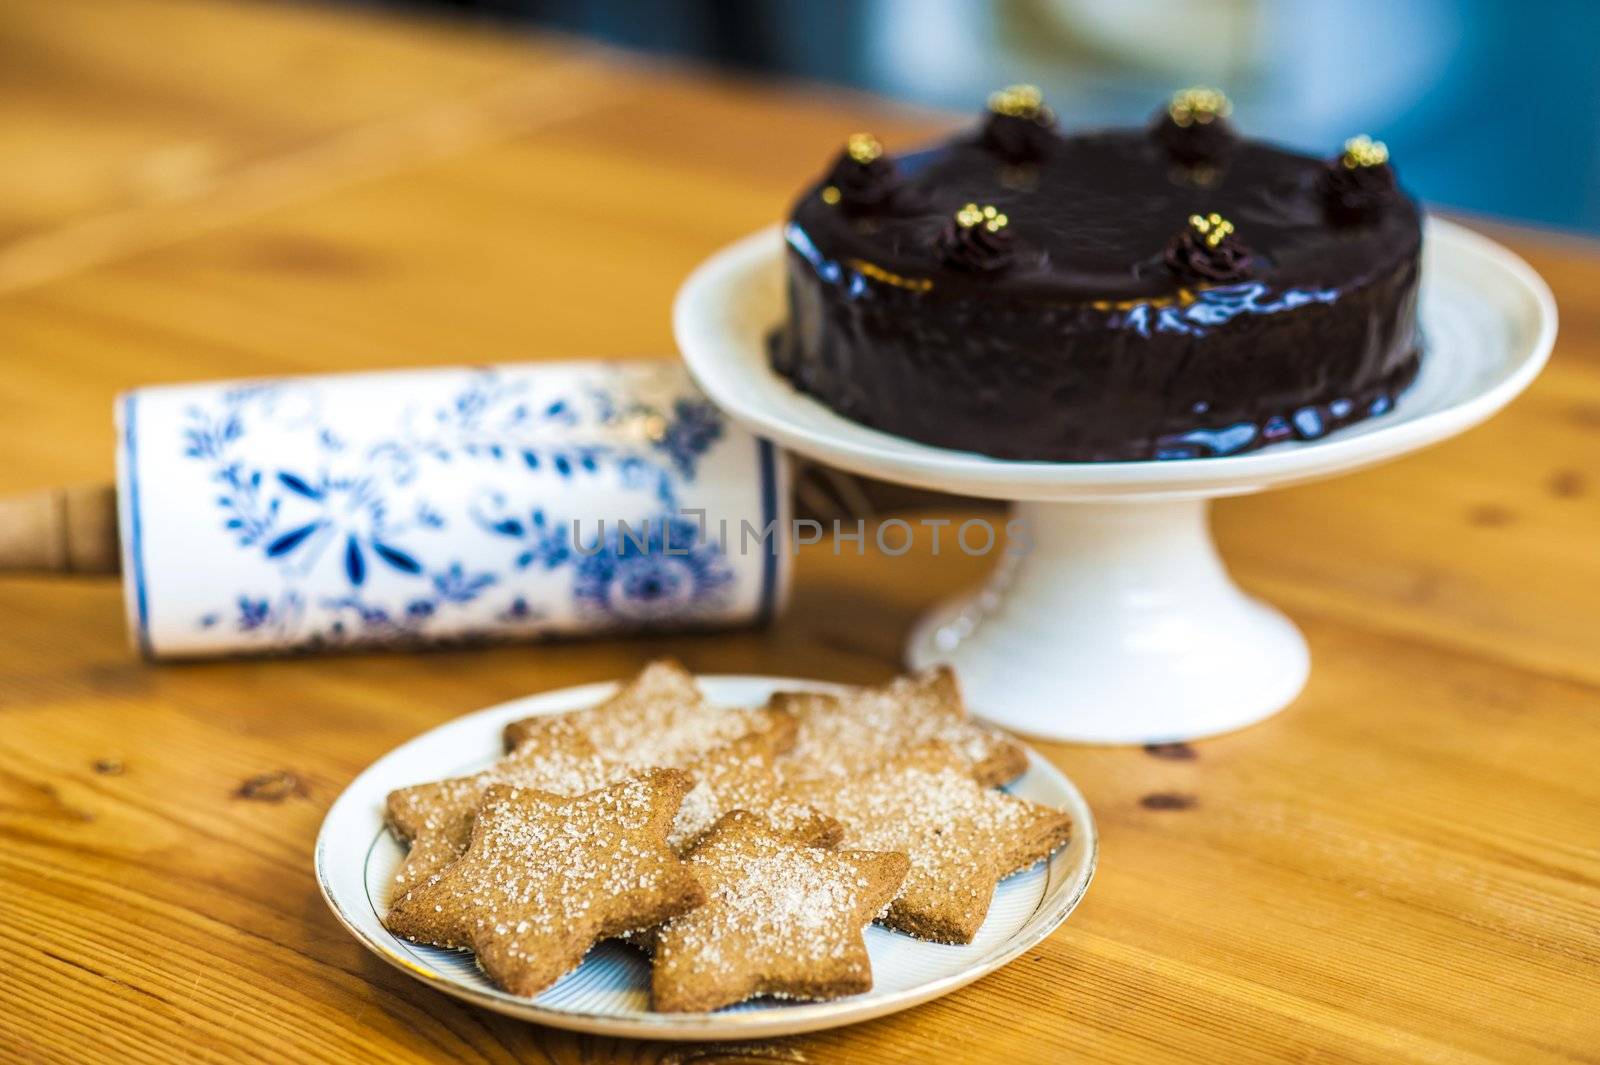 Rich chocolate cake and star shaped cookies ready to be served. Rolling pin on the table.